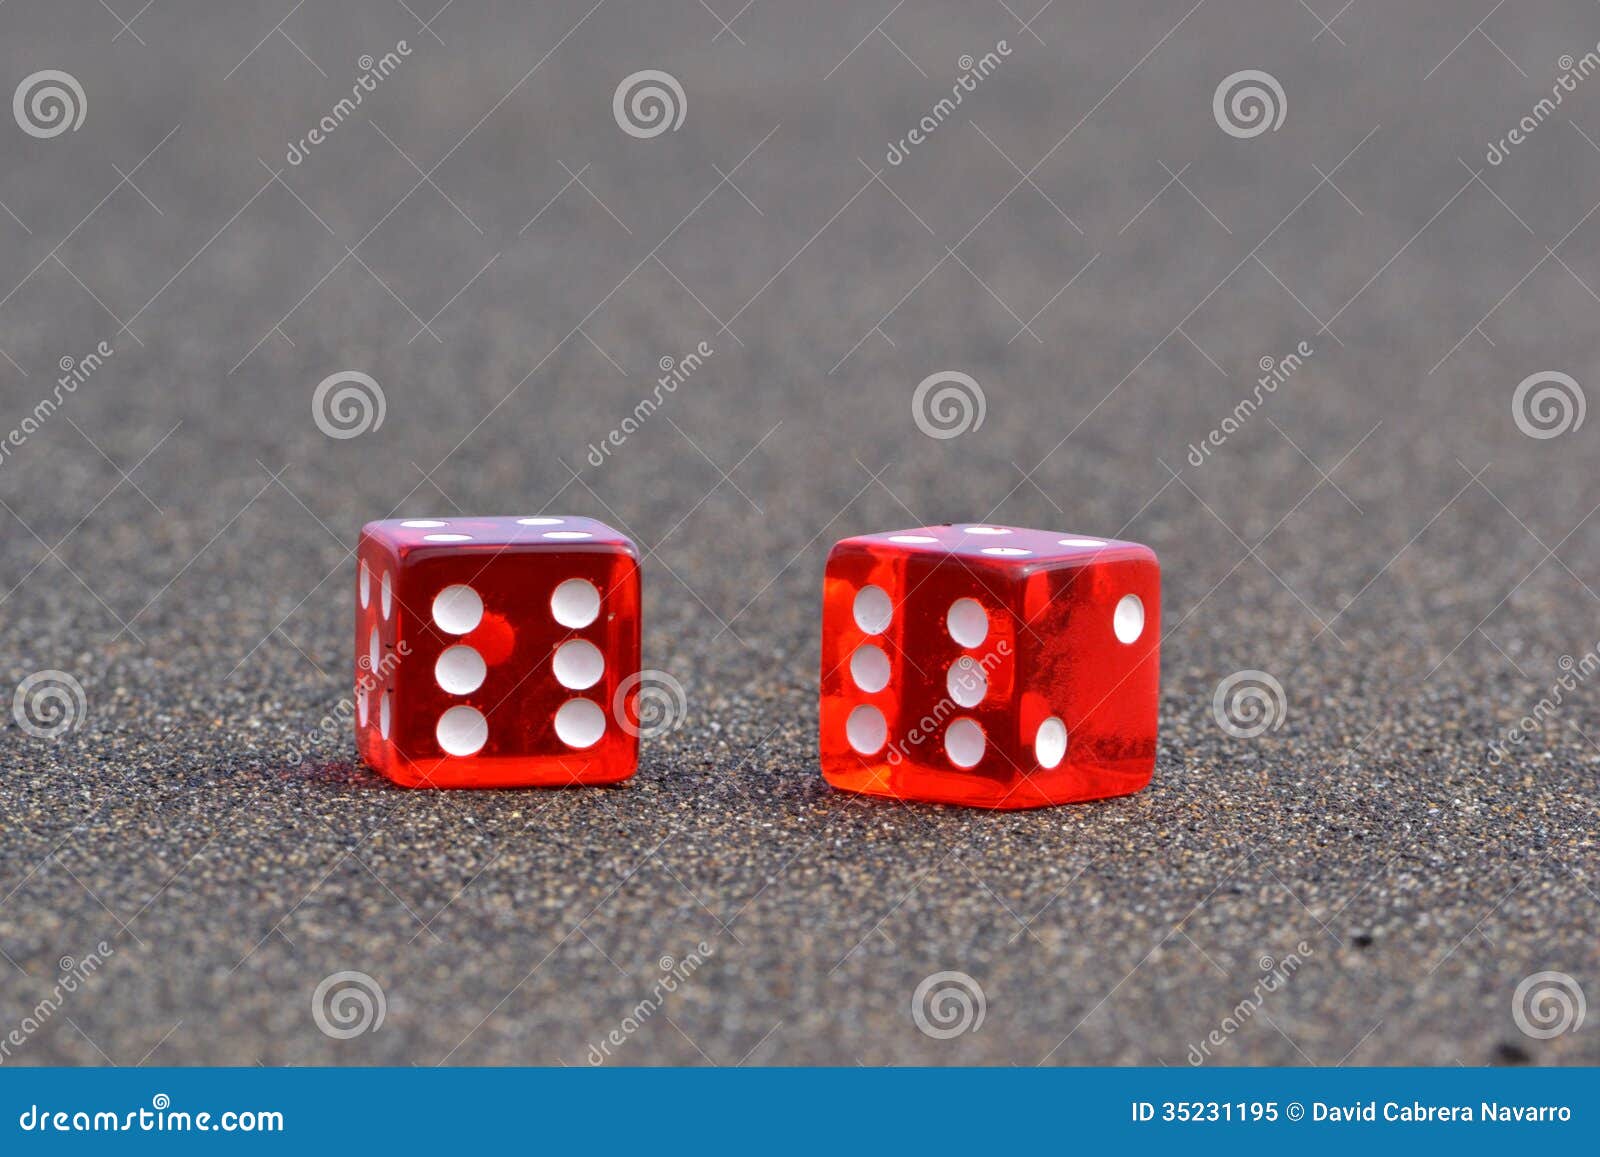 two red dices